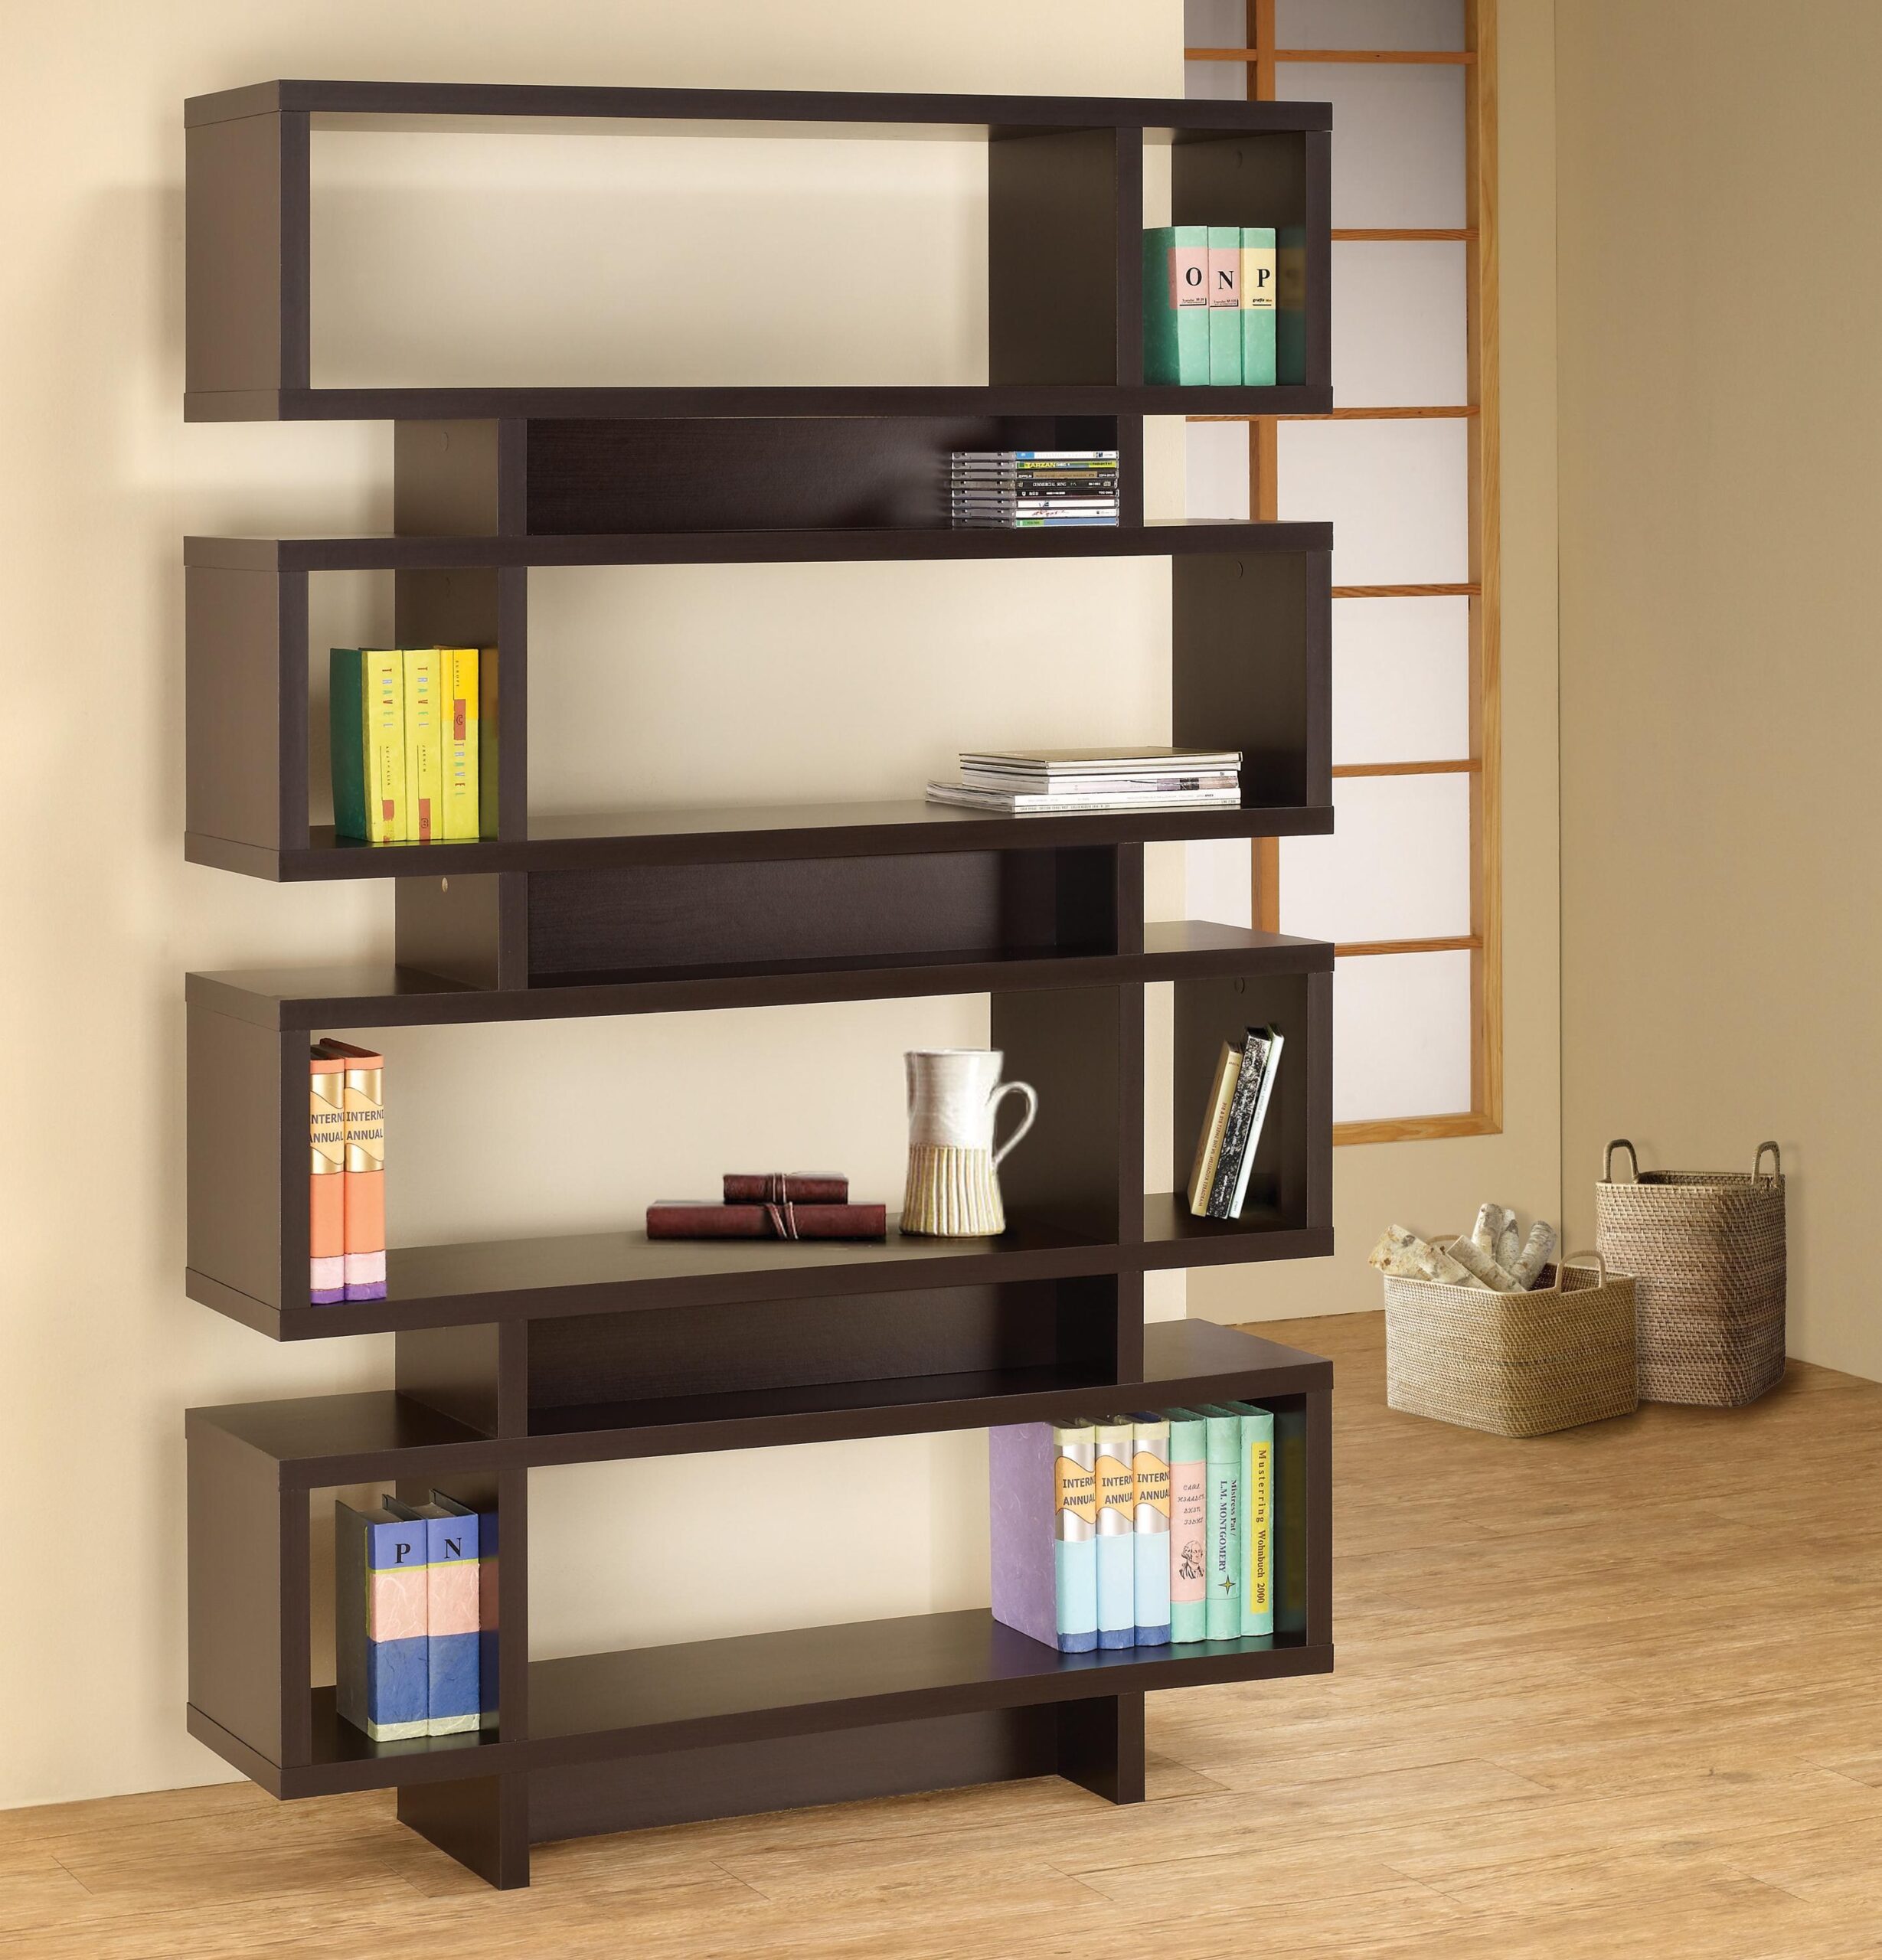 Organize your books with book cases